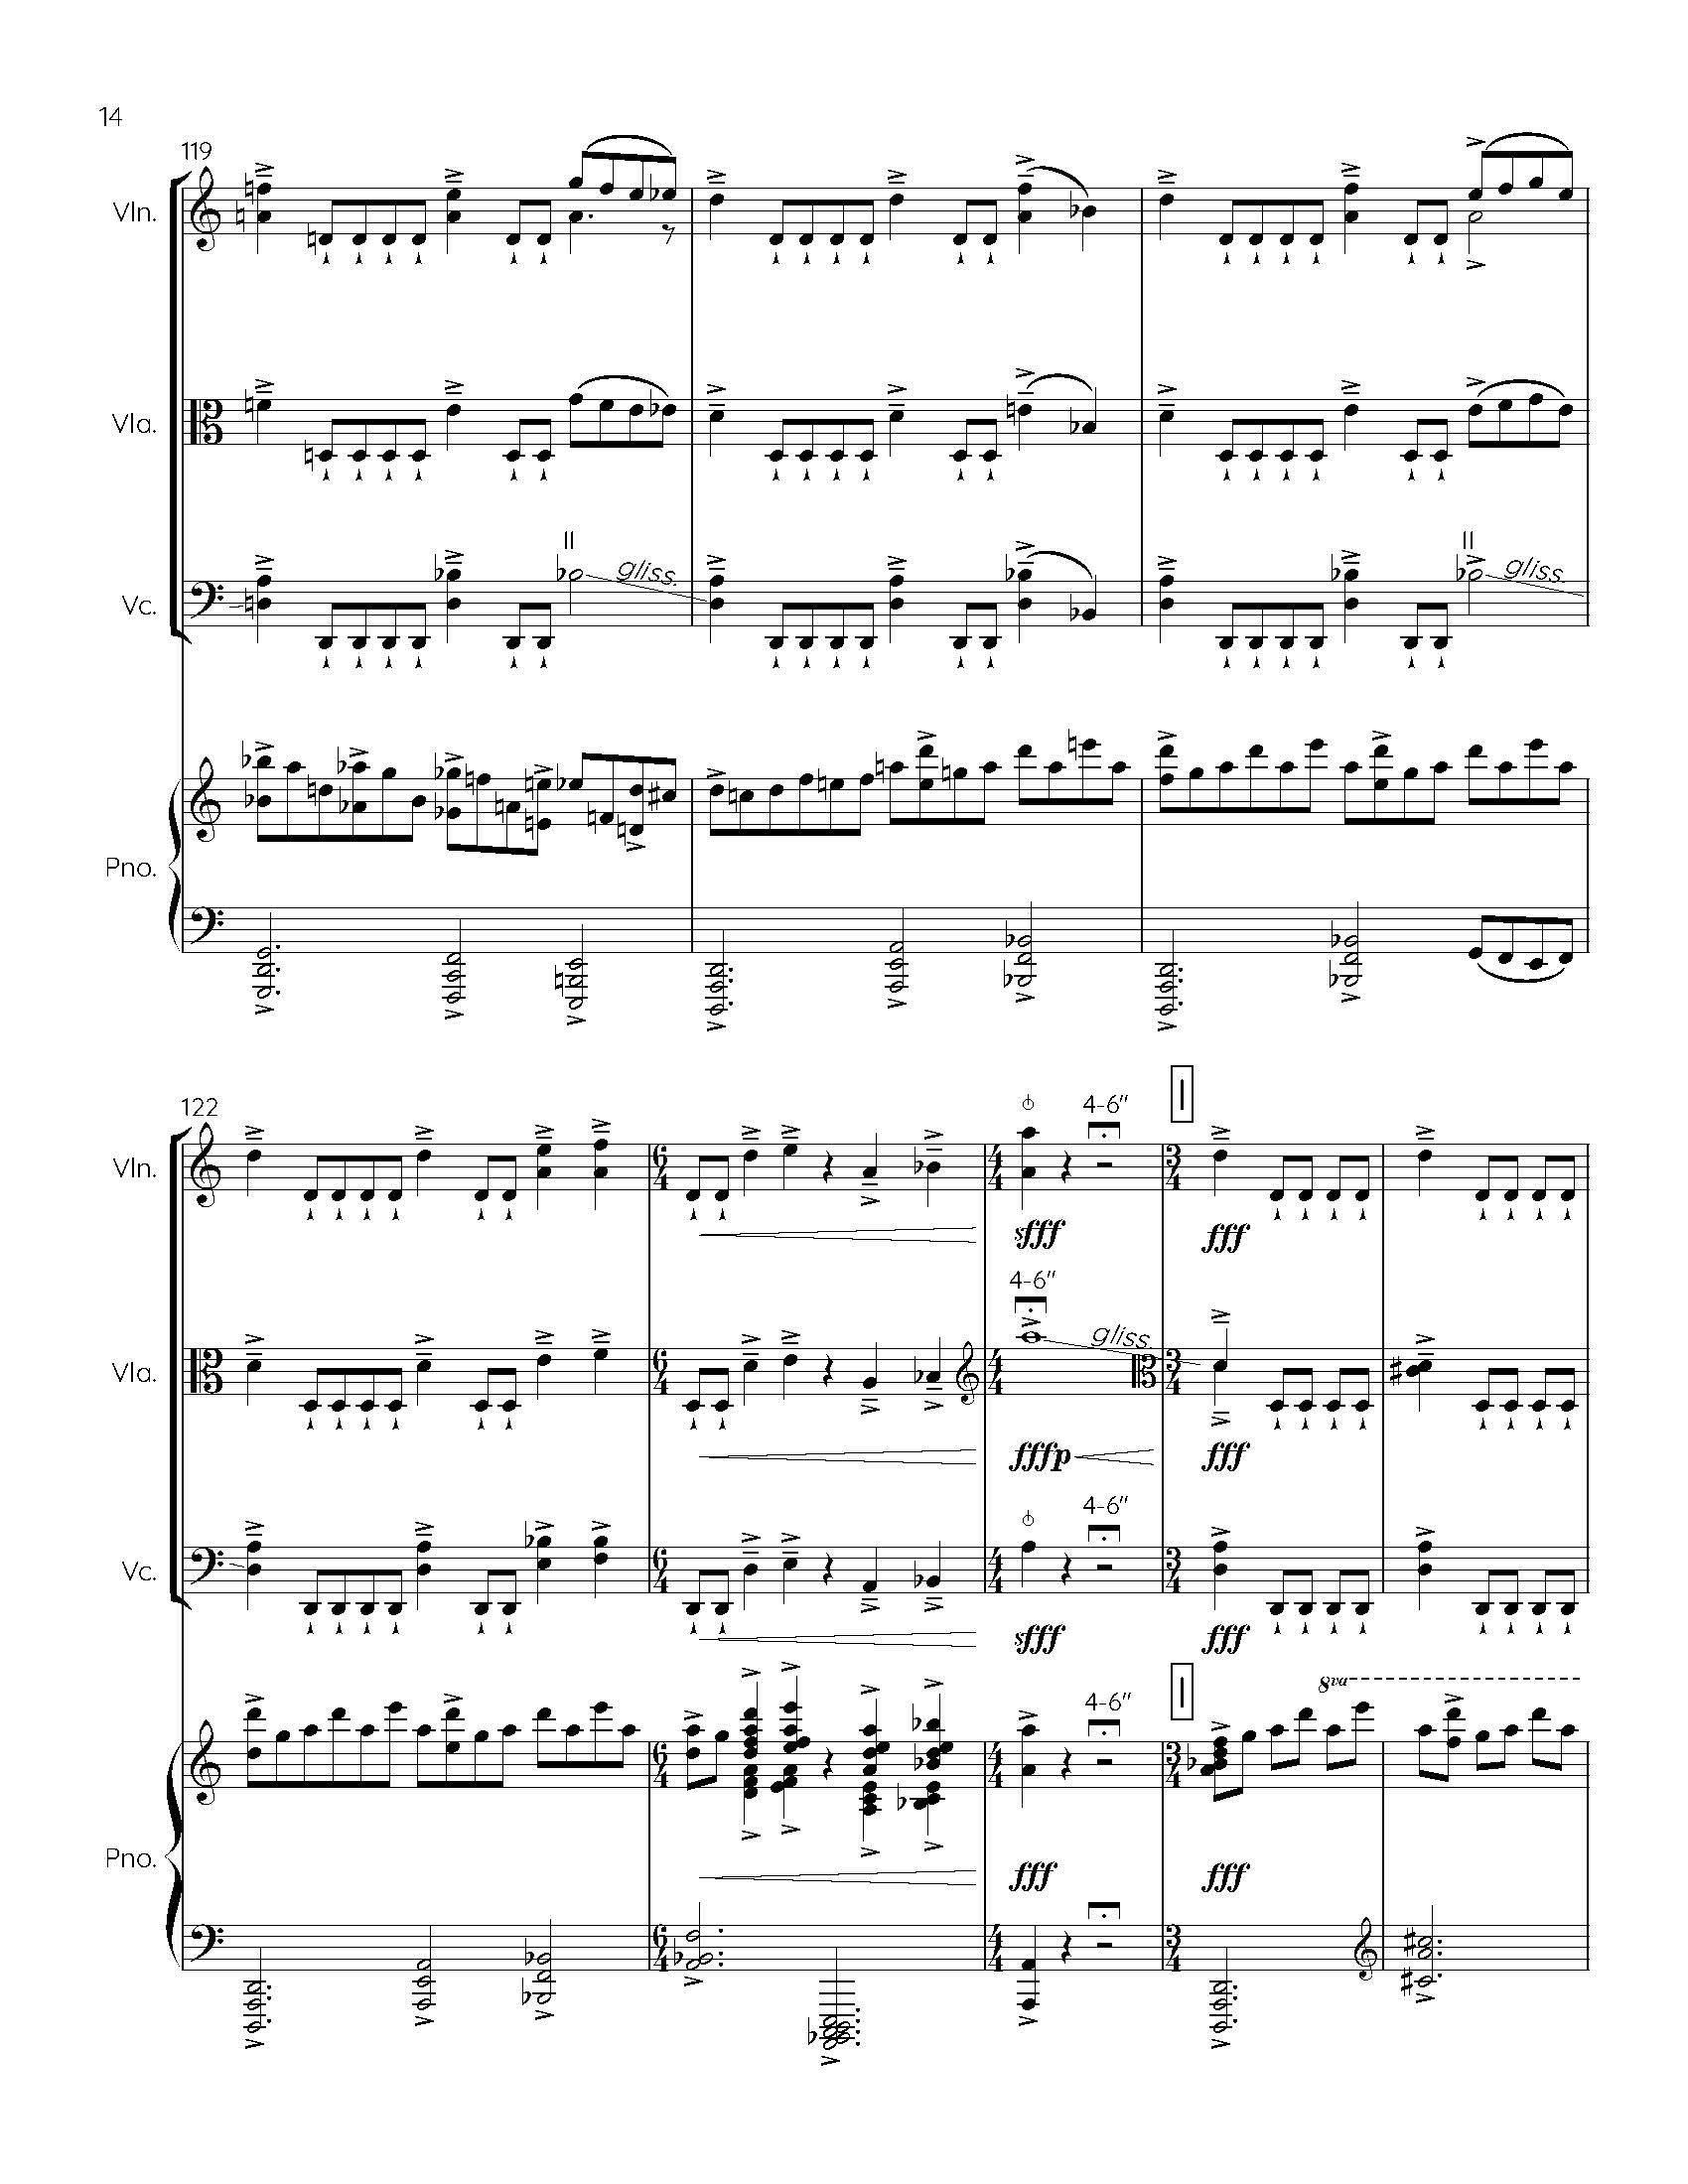 I S L A N D I - Complete Score_Page_20.jpg